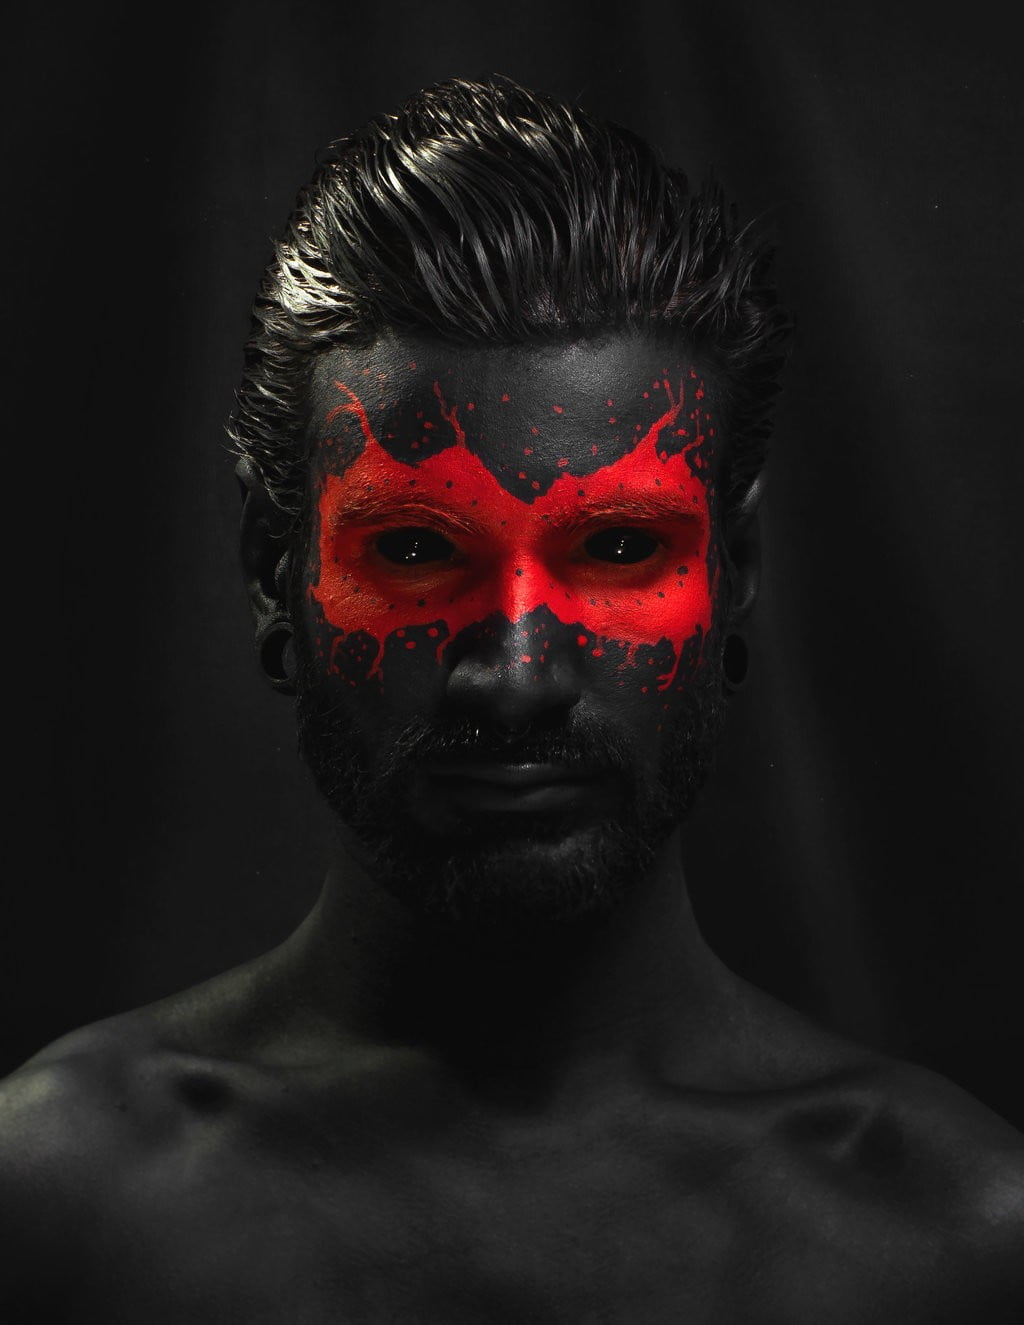 Person with red and black face paint photo – Free Tehran Image on